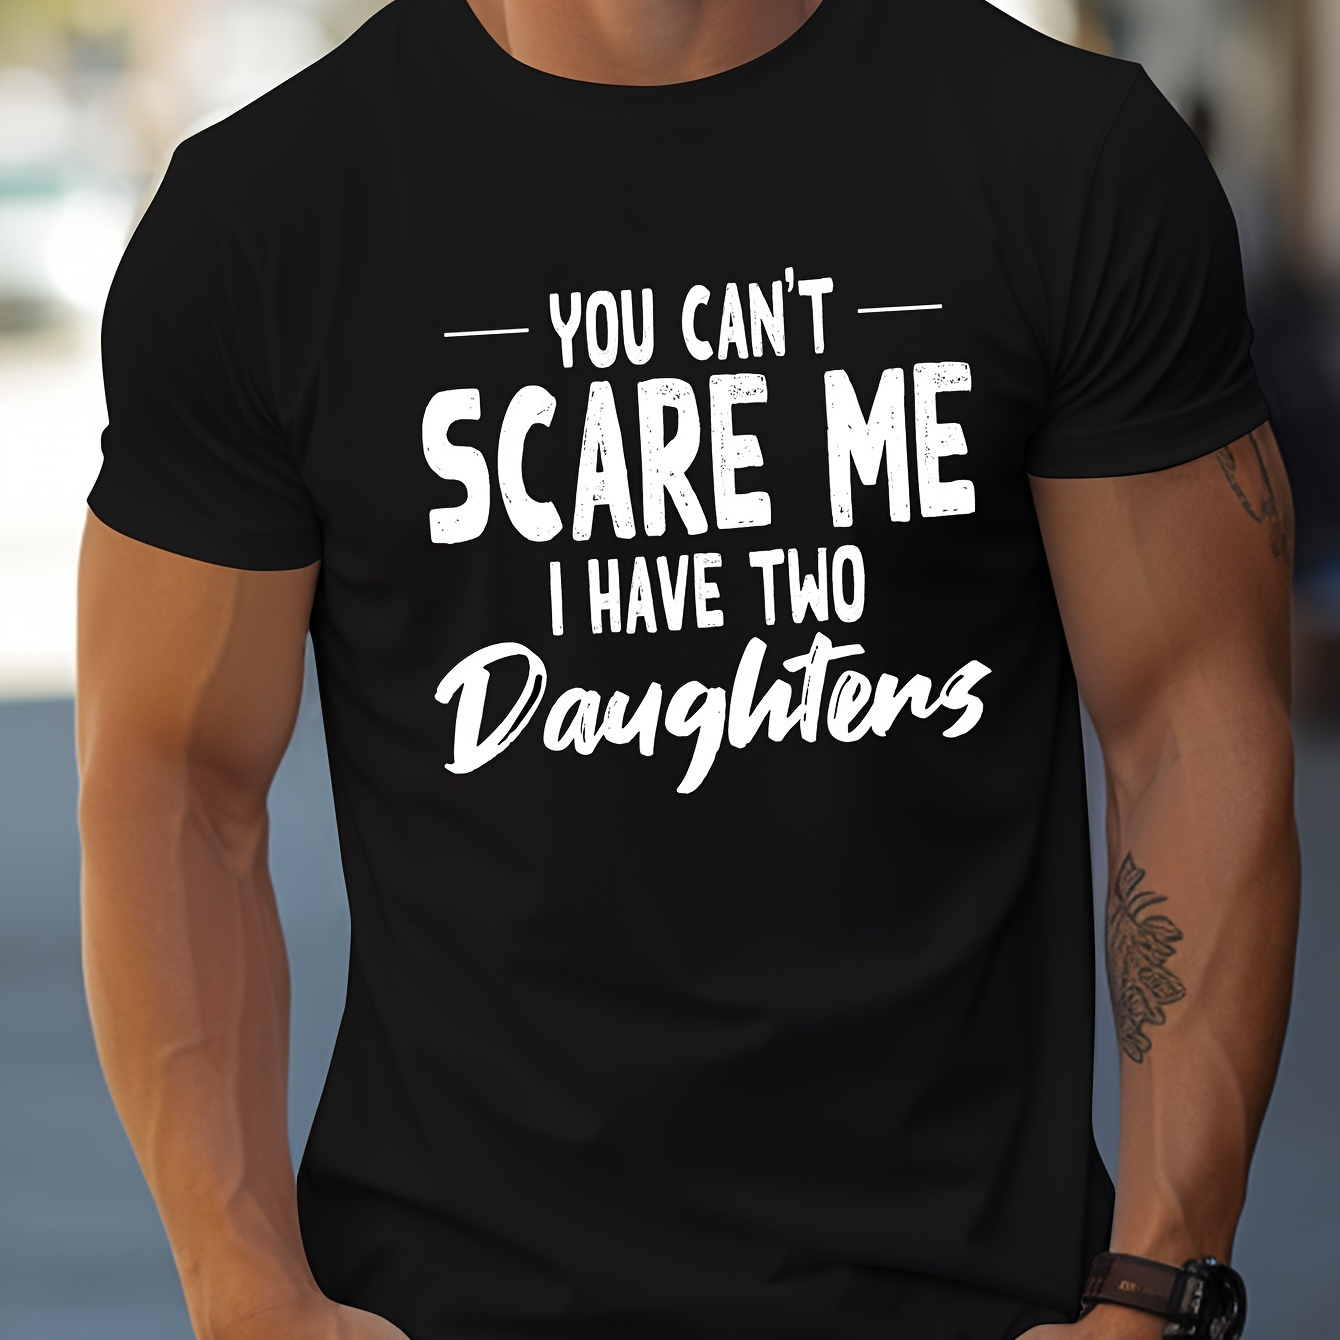 

You Can't Scare Me I Have 2 Daughters Print, Men's Novel Graphic Design T-shirt, Casual Comfy Tees For Summer, Men's Clothing Tops For Daily Activities